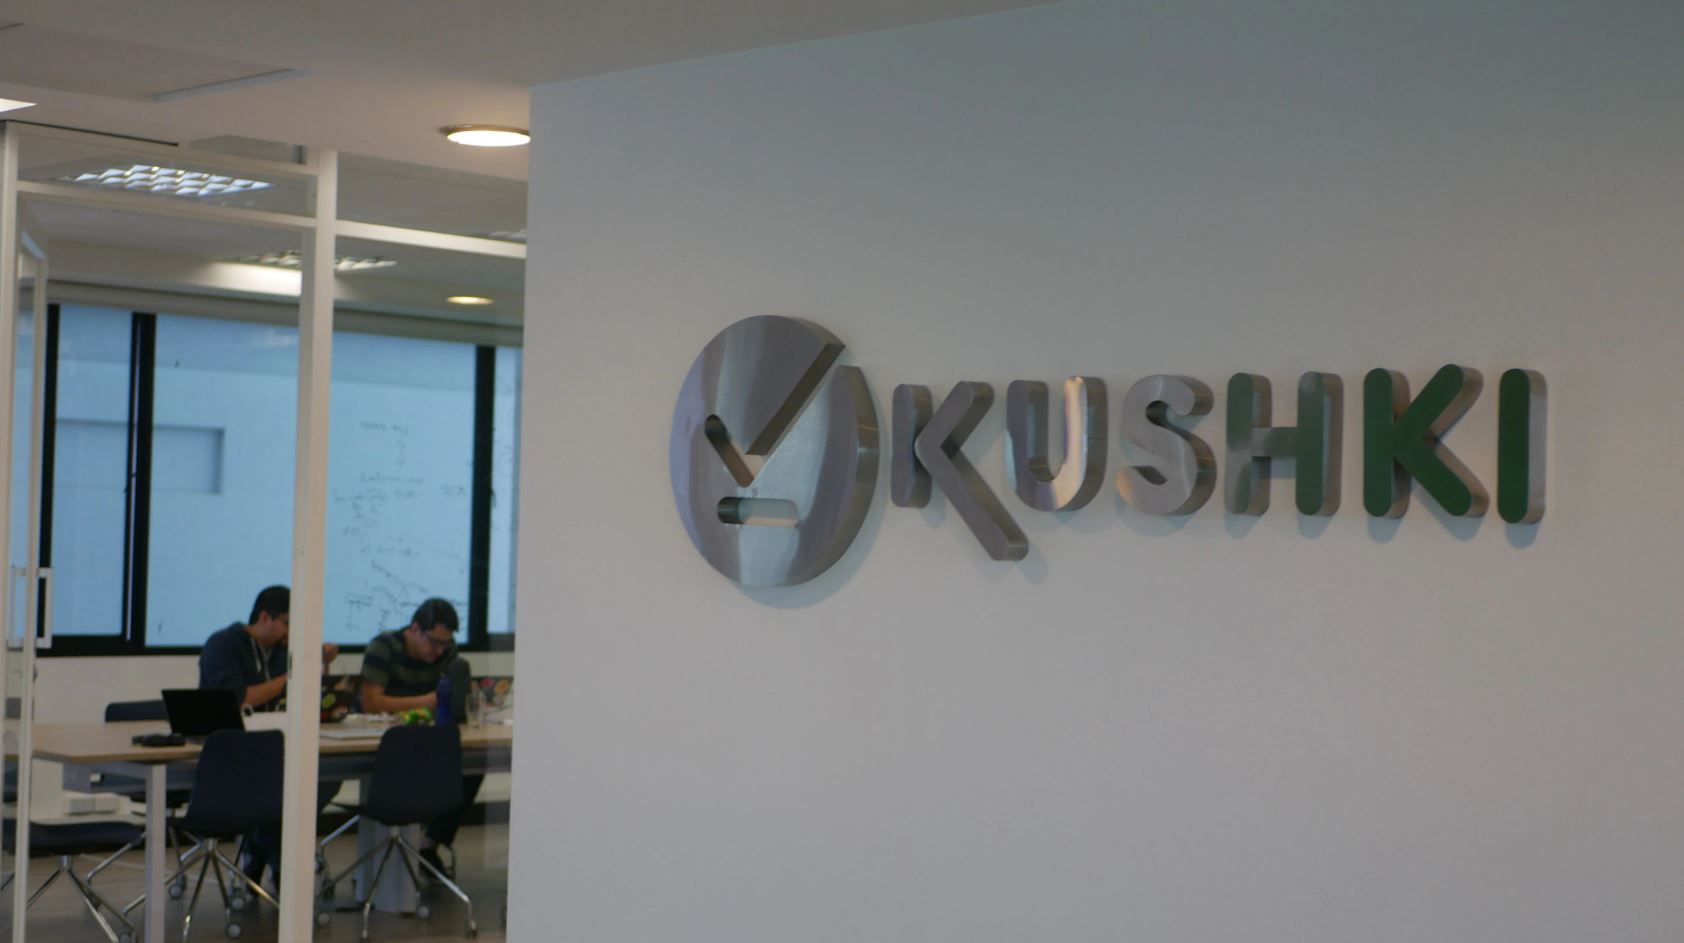 Ecuadorian payment technology company Kushki has announced the purchase of the Mexican point-of-sale terminal platform Billpocket.